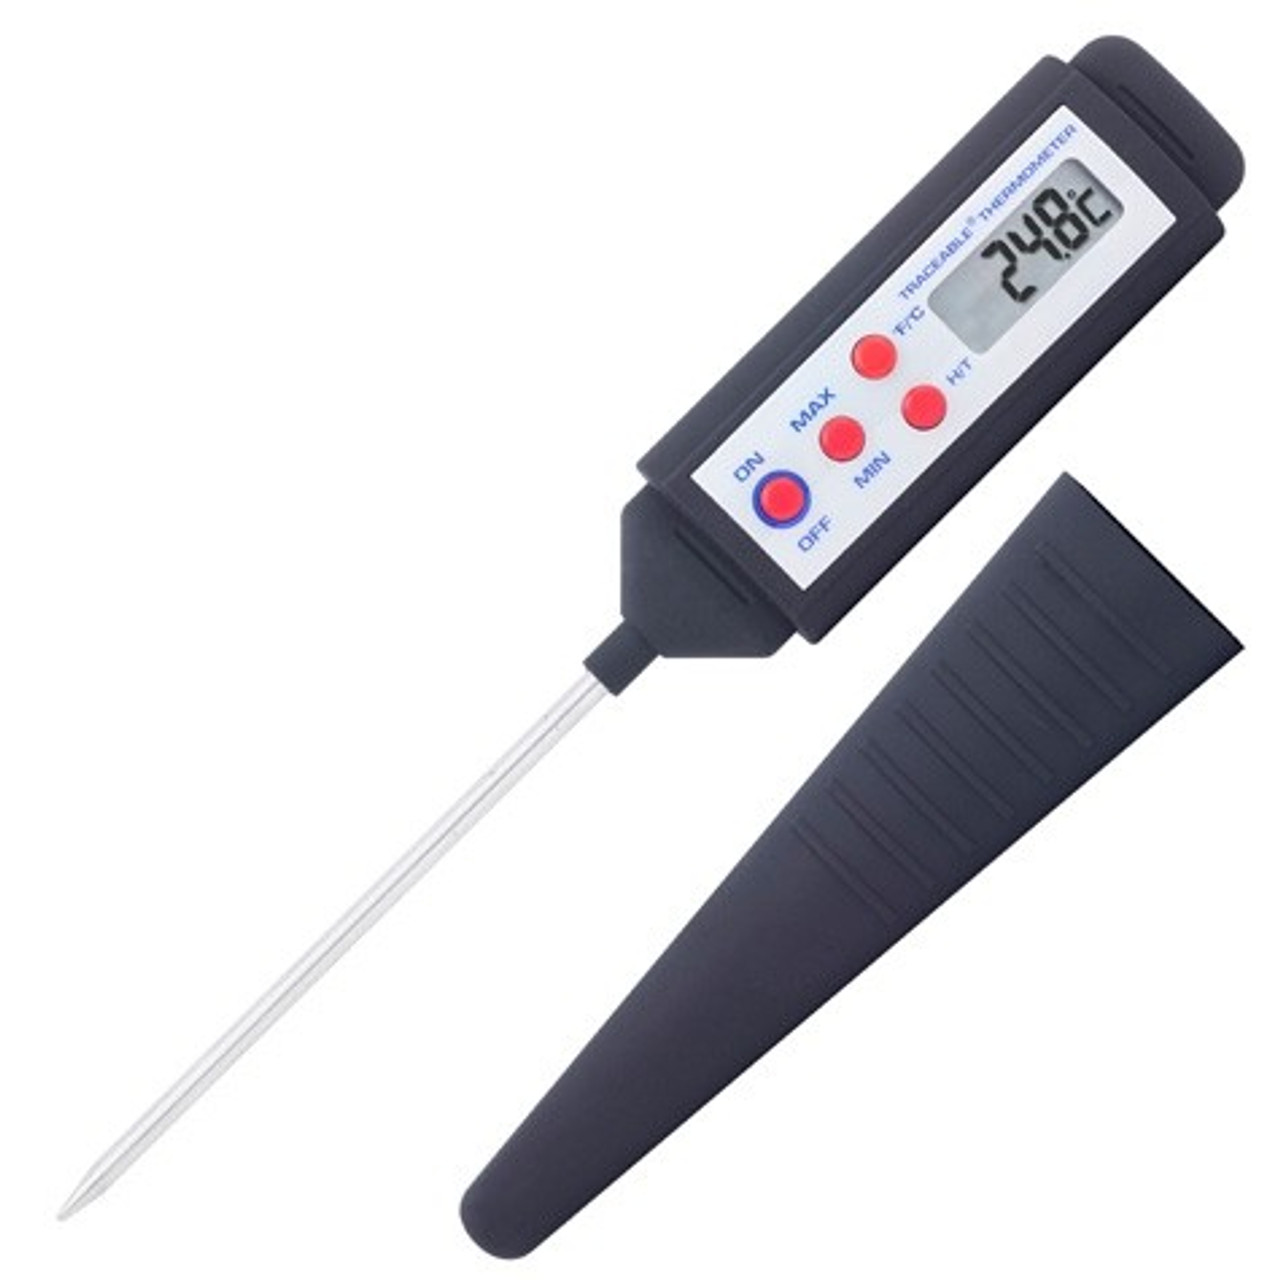 https://cdn11.bigcommerce.com/s-48gxyyxkag/images/stencil/1280x1280/products/25982/68783/Control_Company_4050_Traceable_Pocket_Thermometer_-_CON4050__88189.1660332195.jpg?c=1